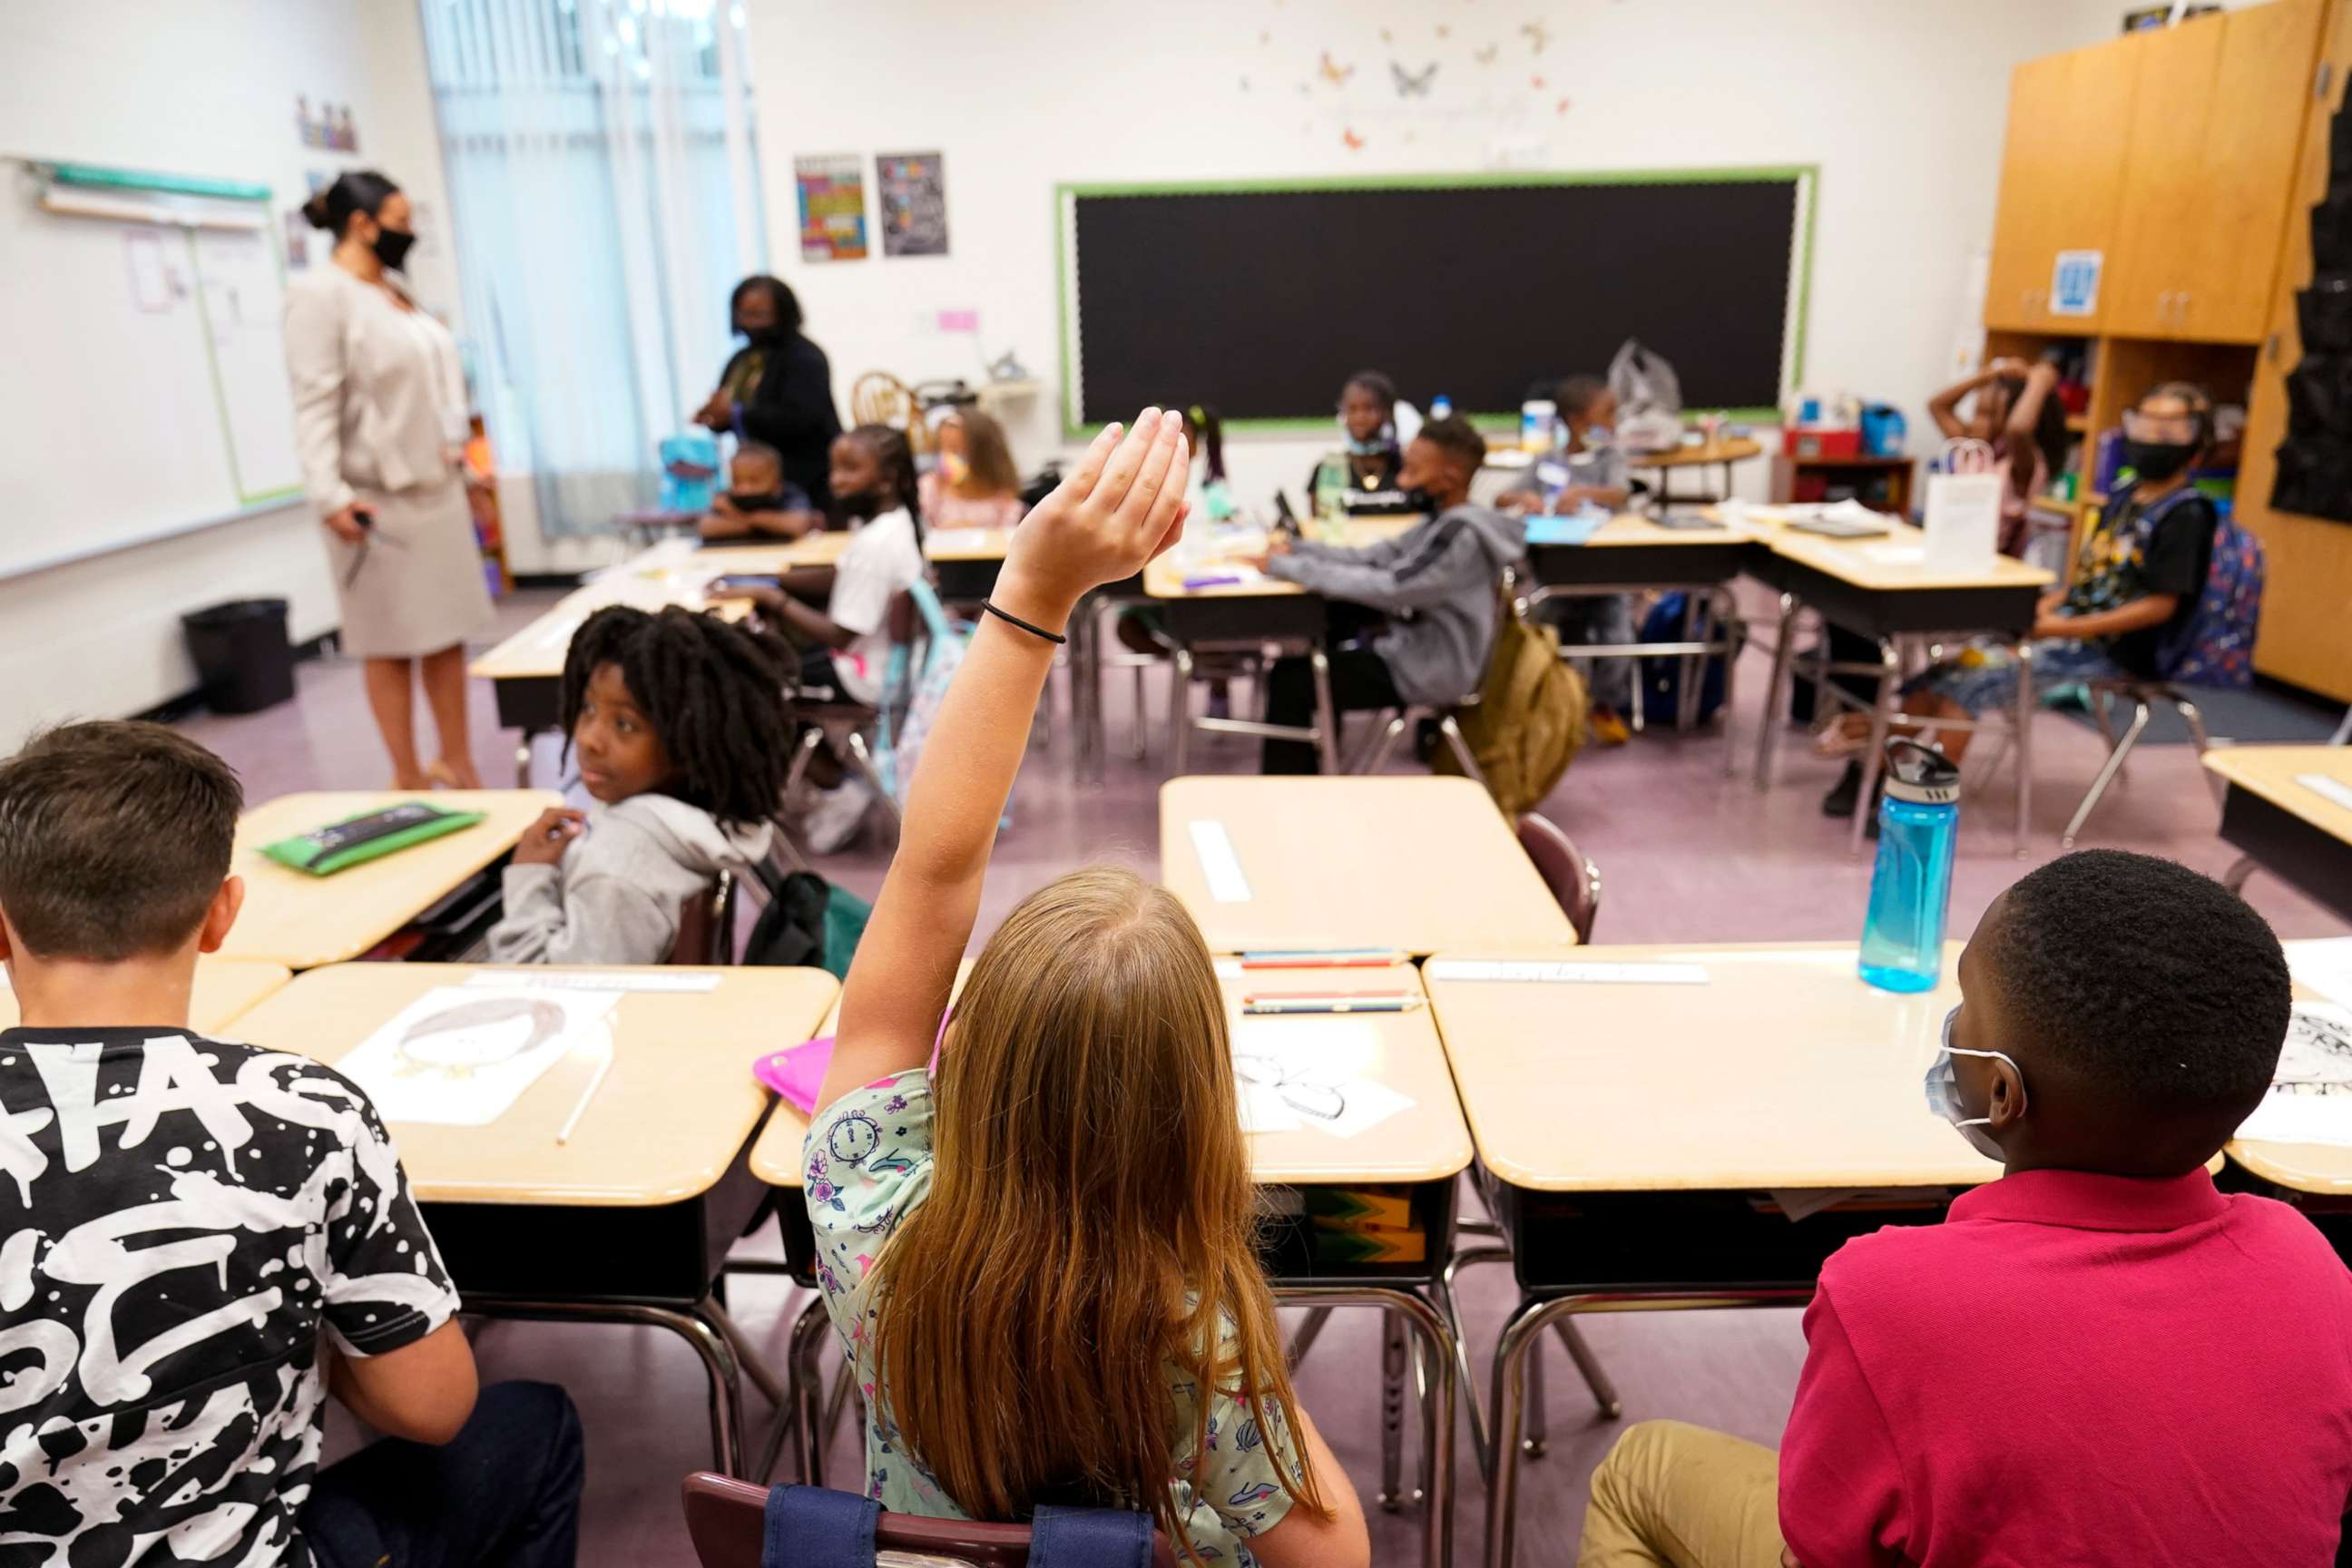 PHOTO: A student raises their hand in a classroom at Tussahaw Elementary School on Aug. 4, 2021, in McDonough, Ga.